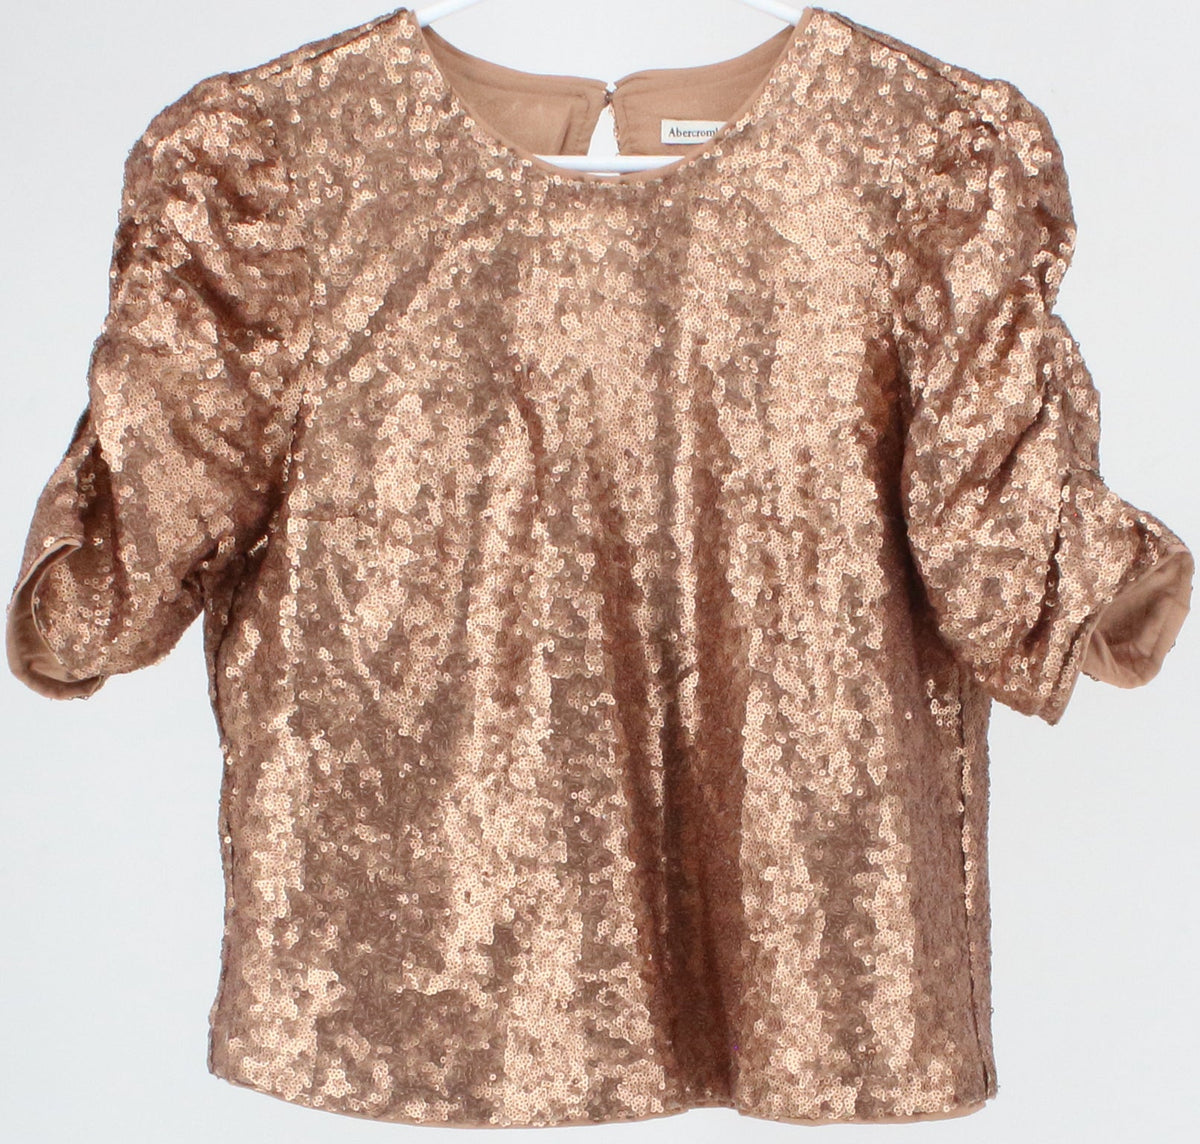 Abercrombie & Fitch Bronze Sequins Top